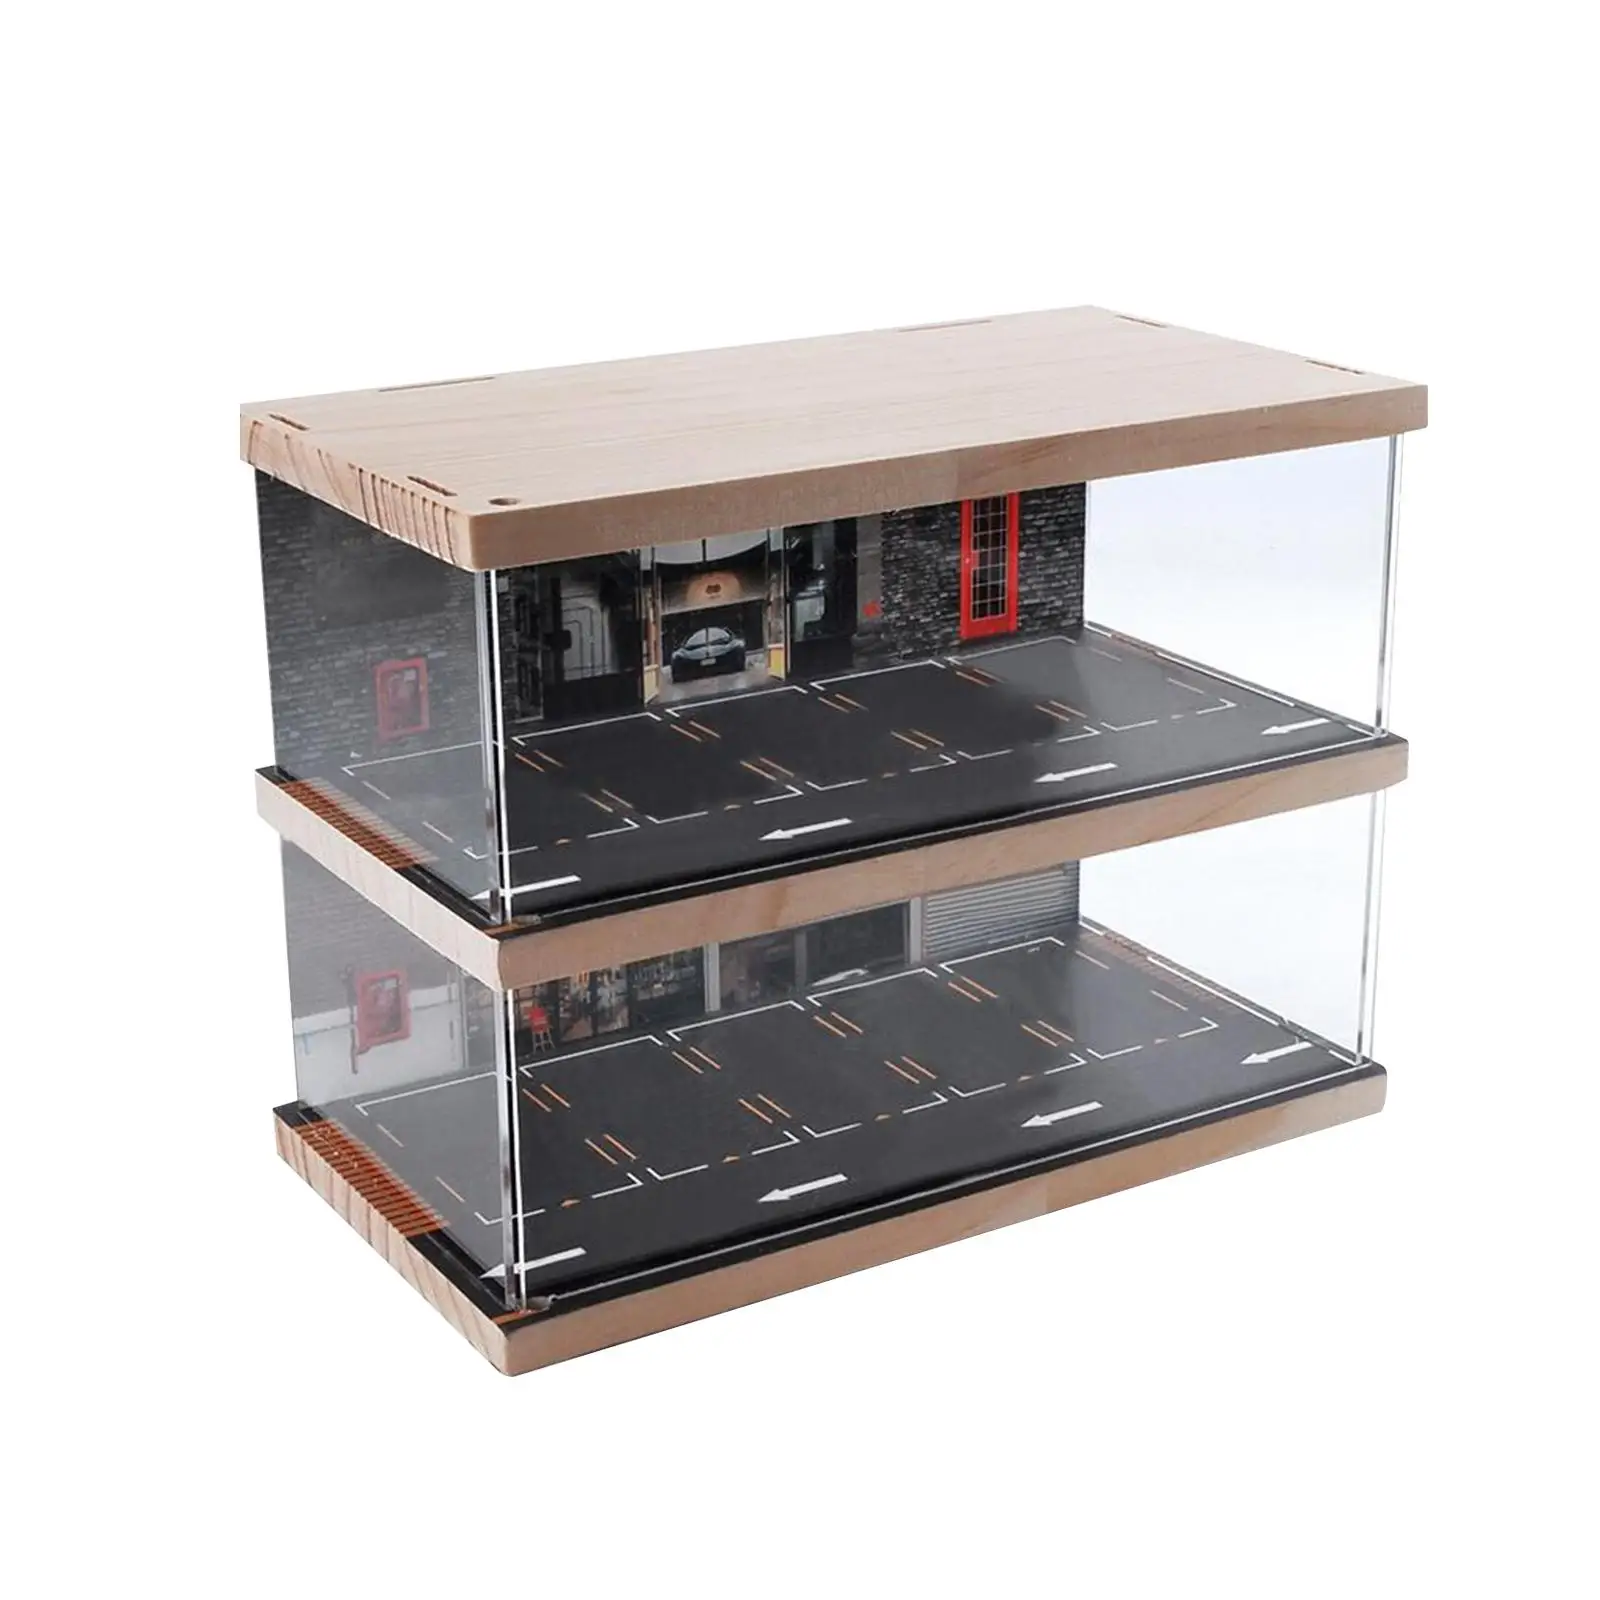 1:64 Scale Parking Lot Display Case Protection Dustproof Collection Diorama